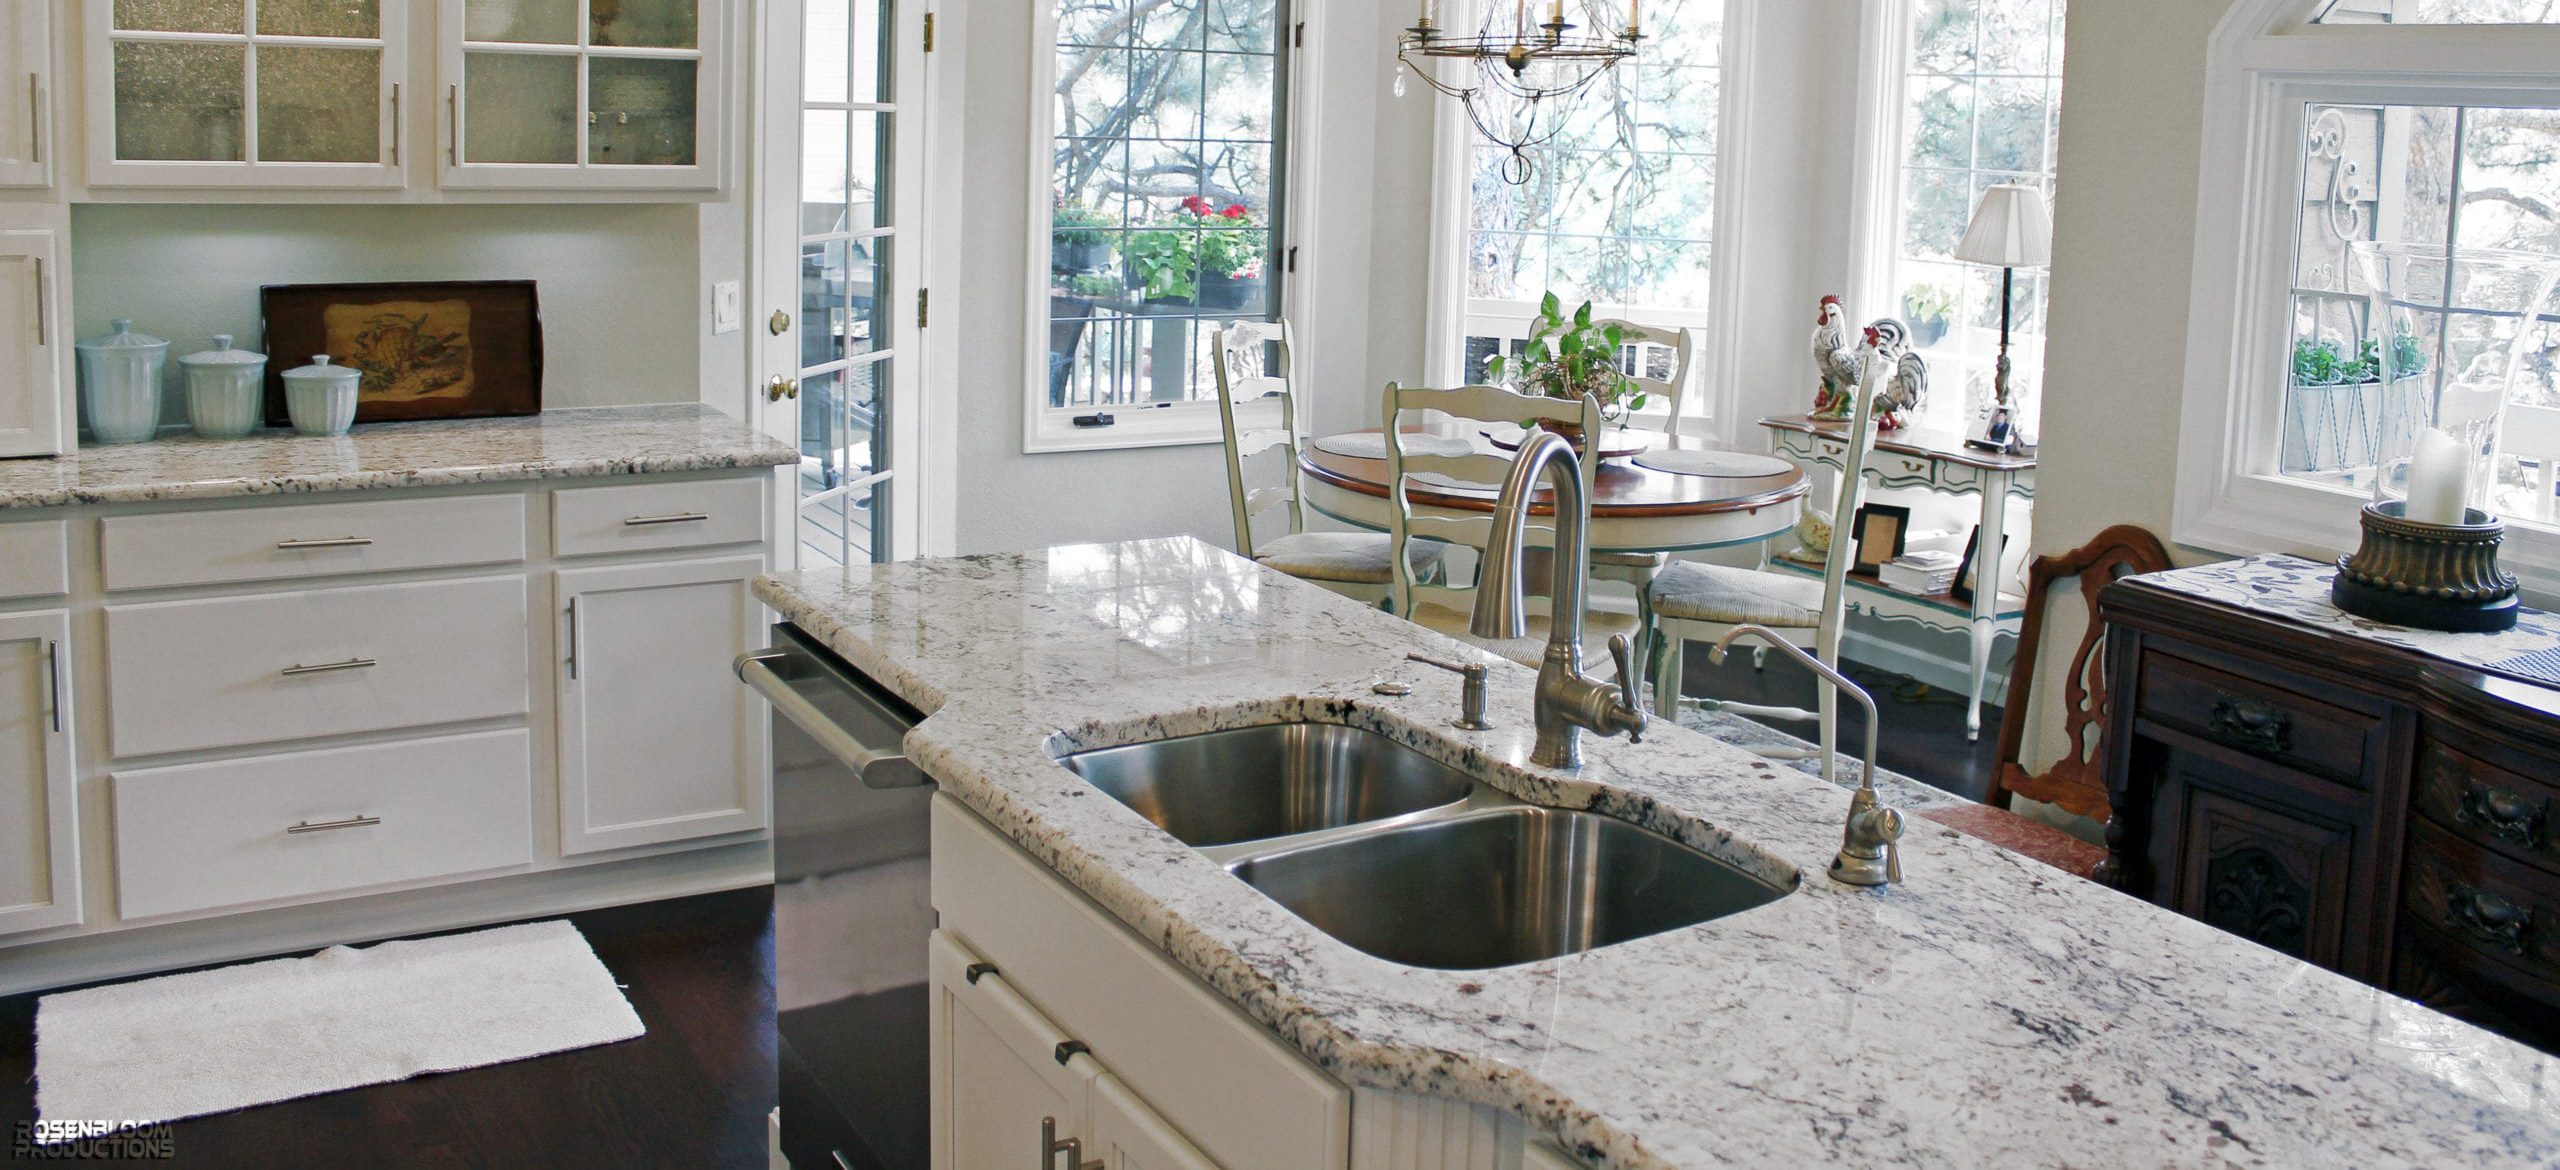 Full Kitchen With Granite Natural Stone Countertop